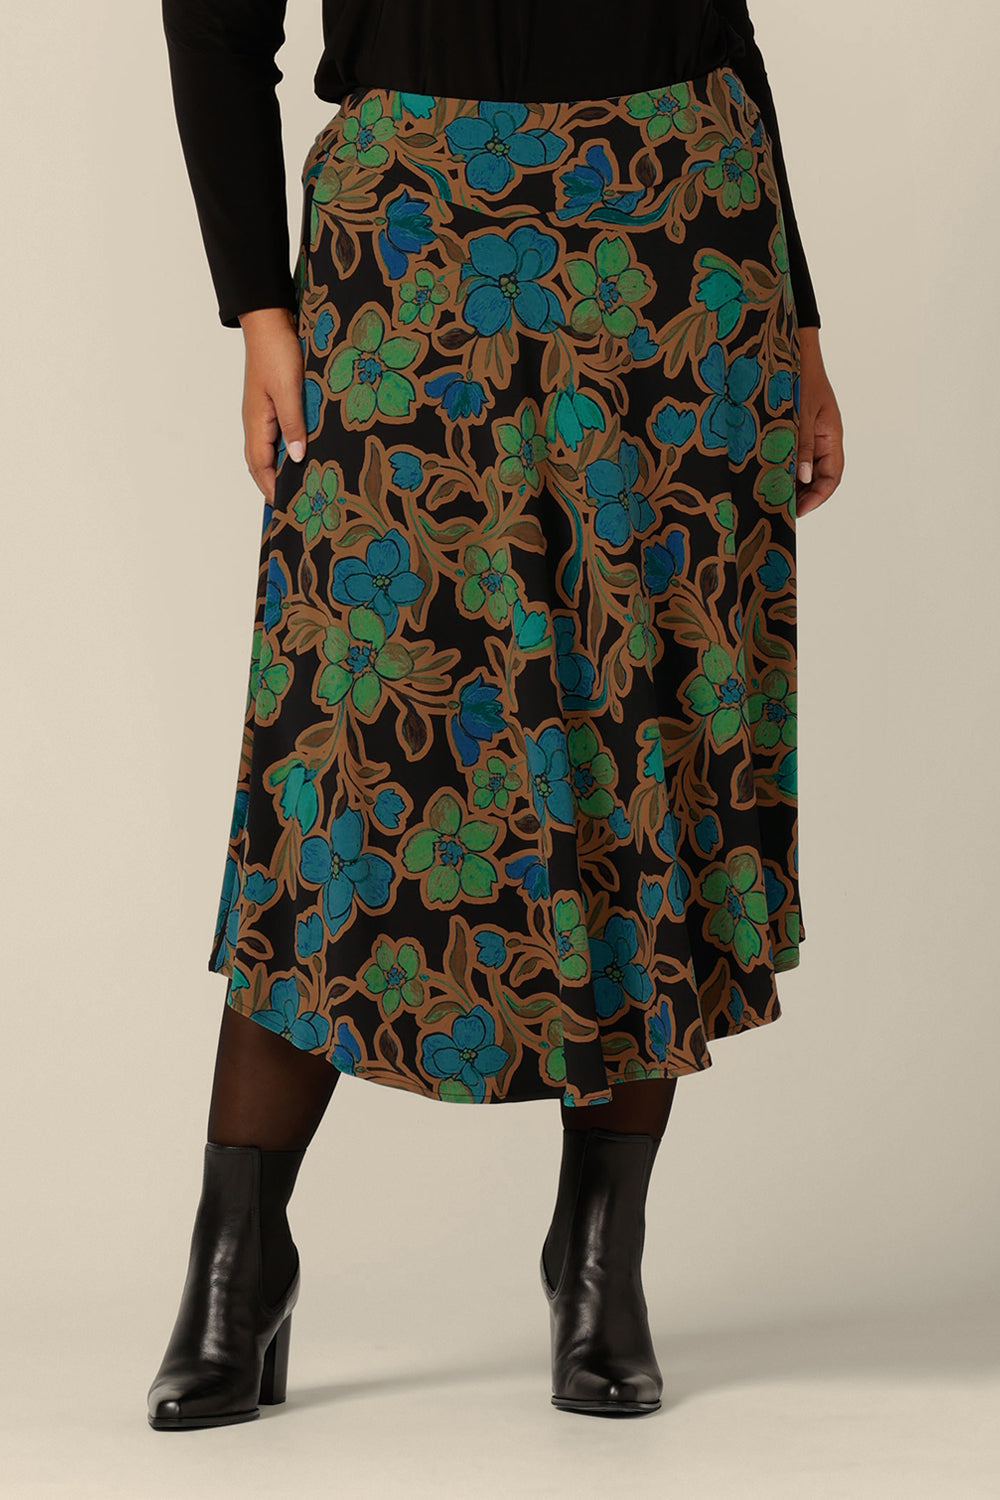 An asymmetric, midi skirt in a size 18 by Australian and New Zealand women's clothing brand, L&F. Made in Australia, shop this jersey skirt in an inclusive size range of 8 to 24.